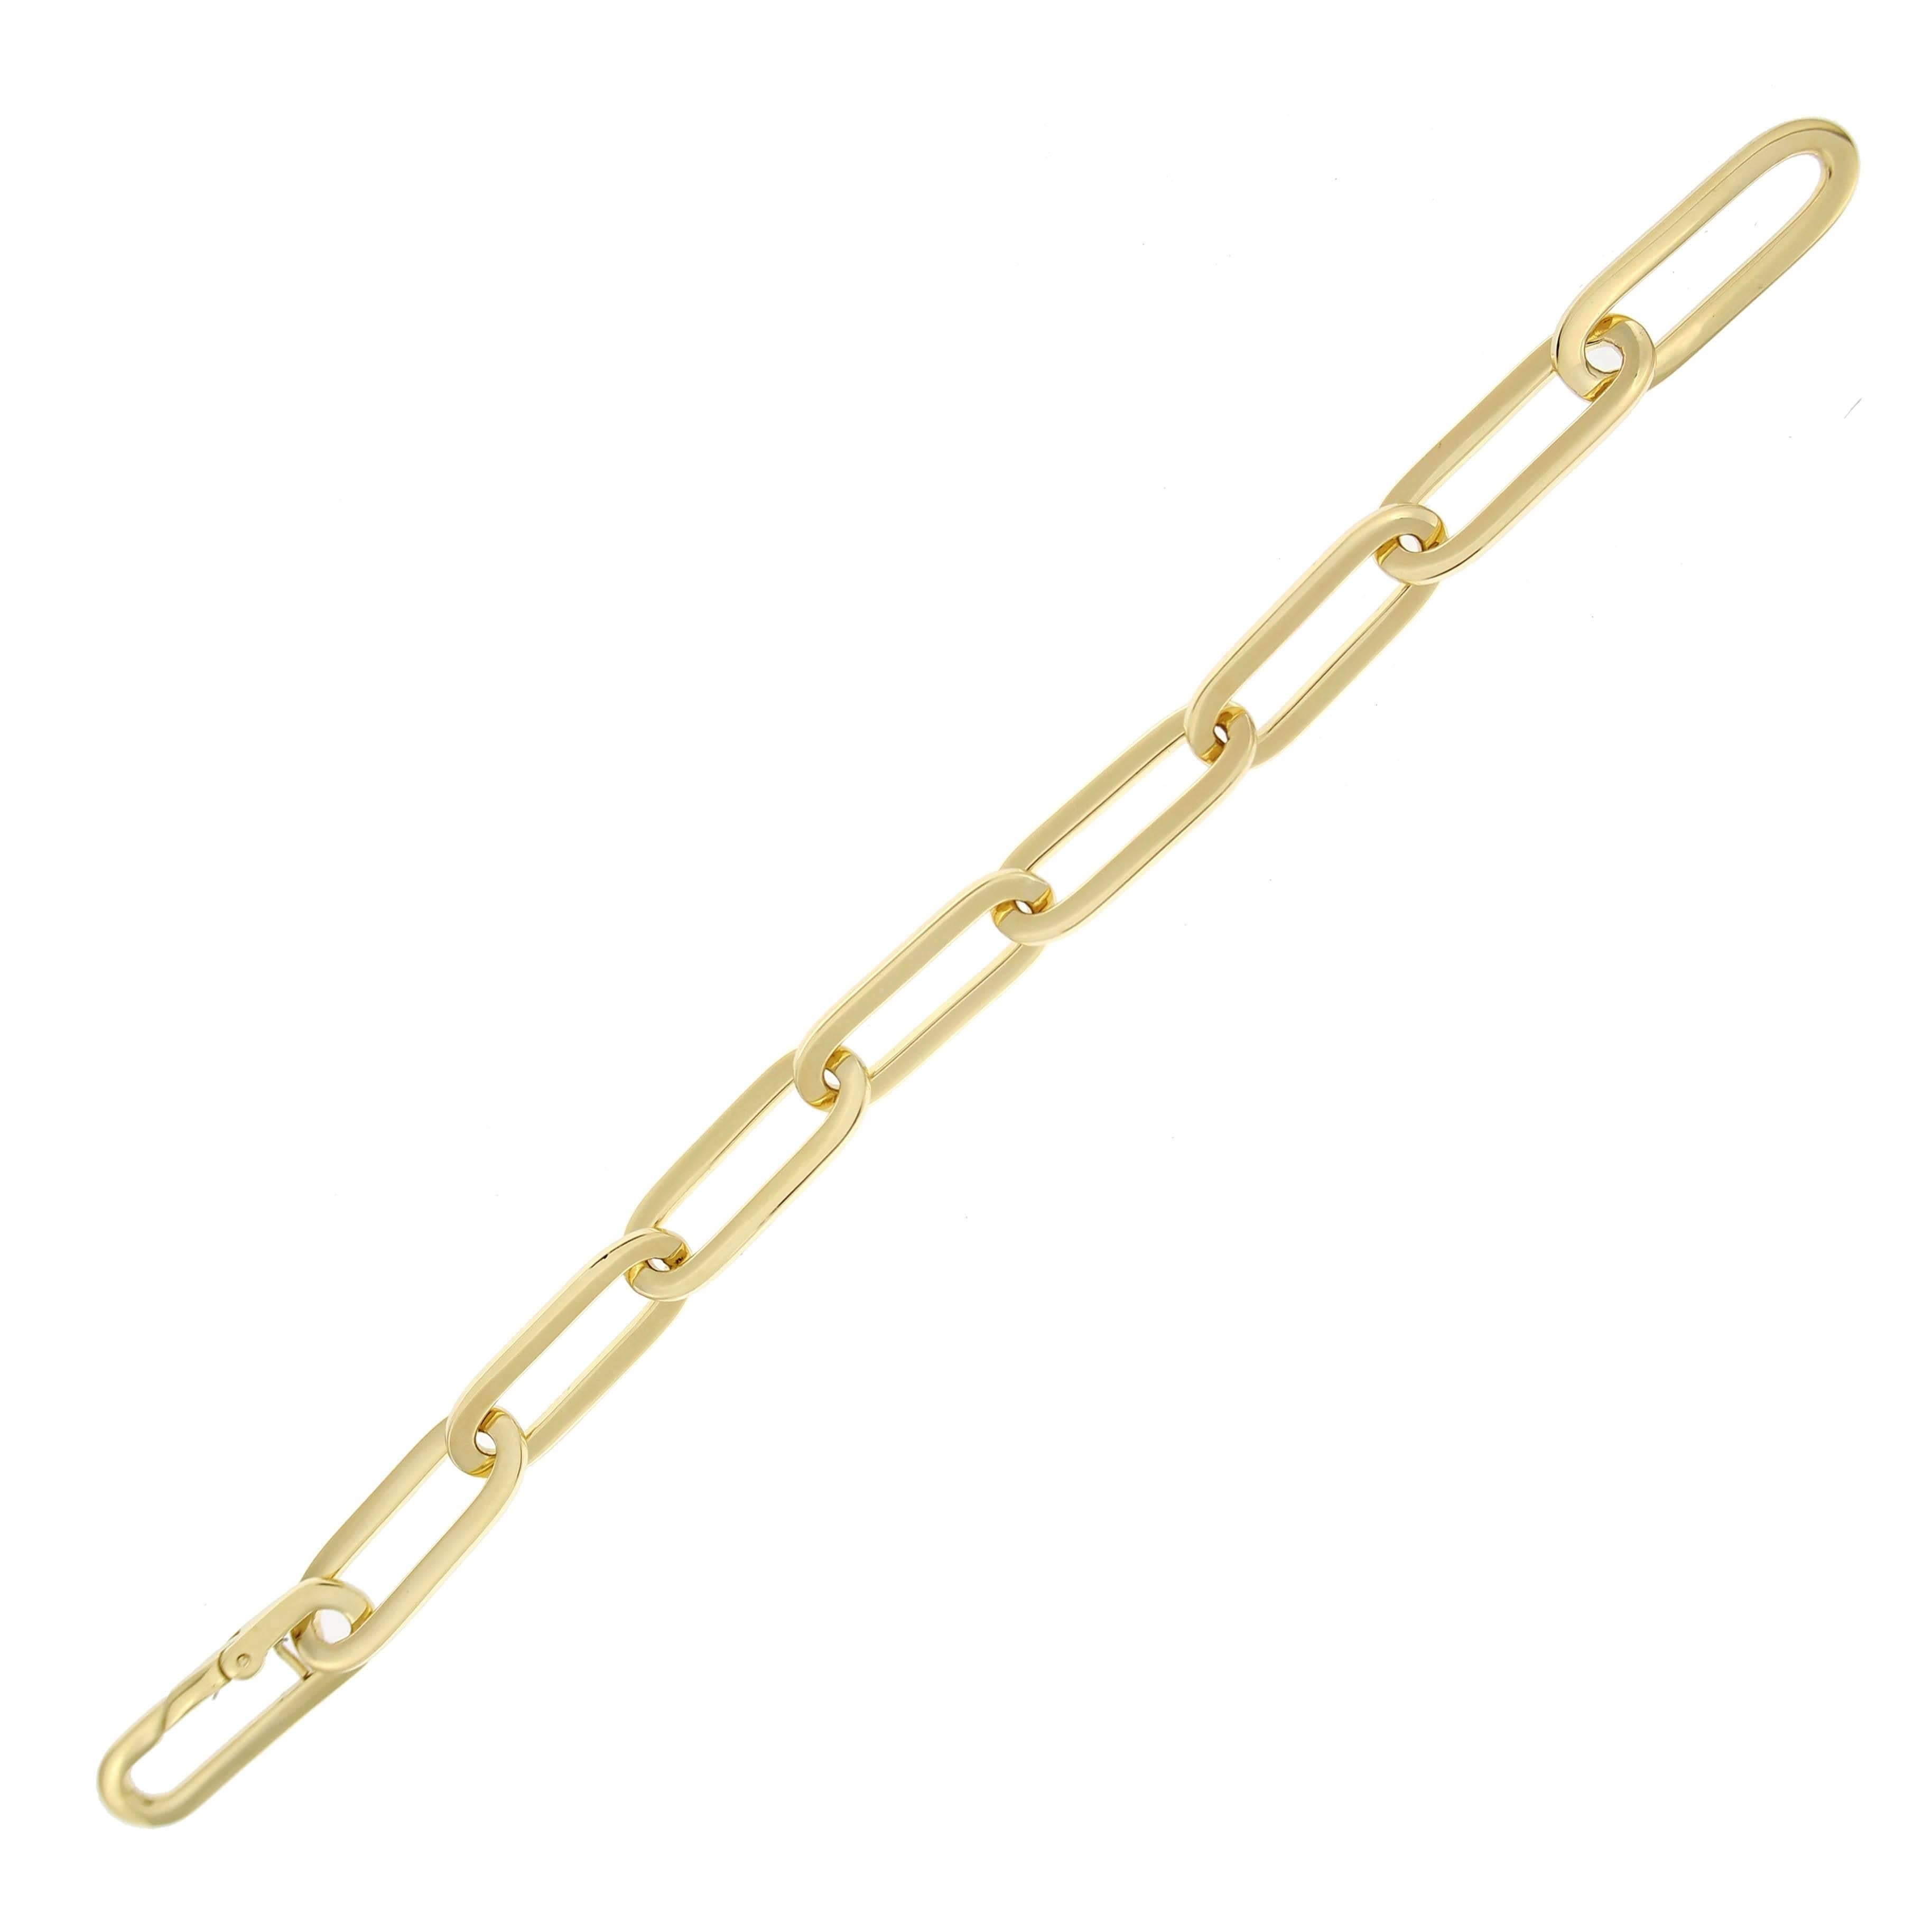 Jona design collection, hand crafted in Italy,18 karat yellow gold 8.27 in. long chain bracelet.

All of our jewelry is new and has never been previously owned or worn.